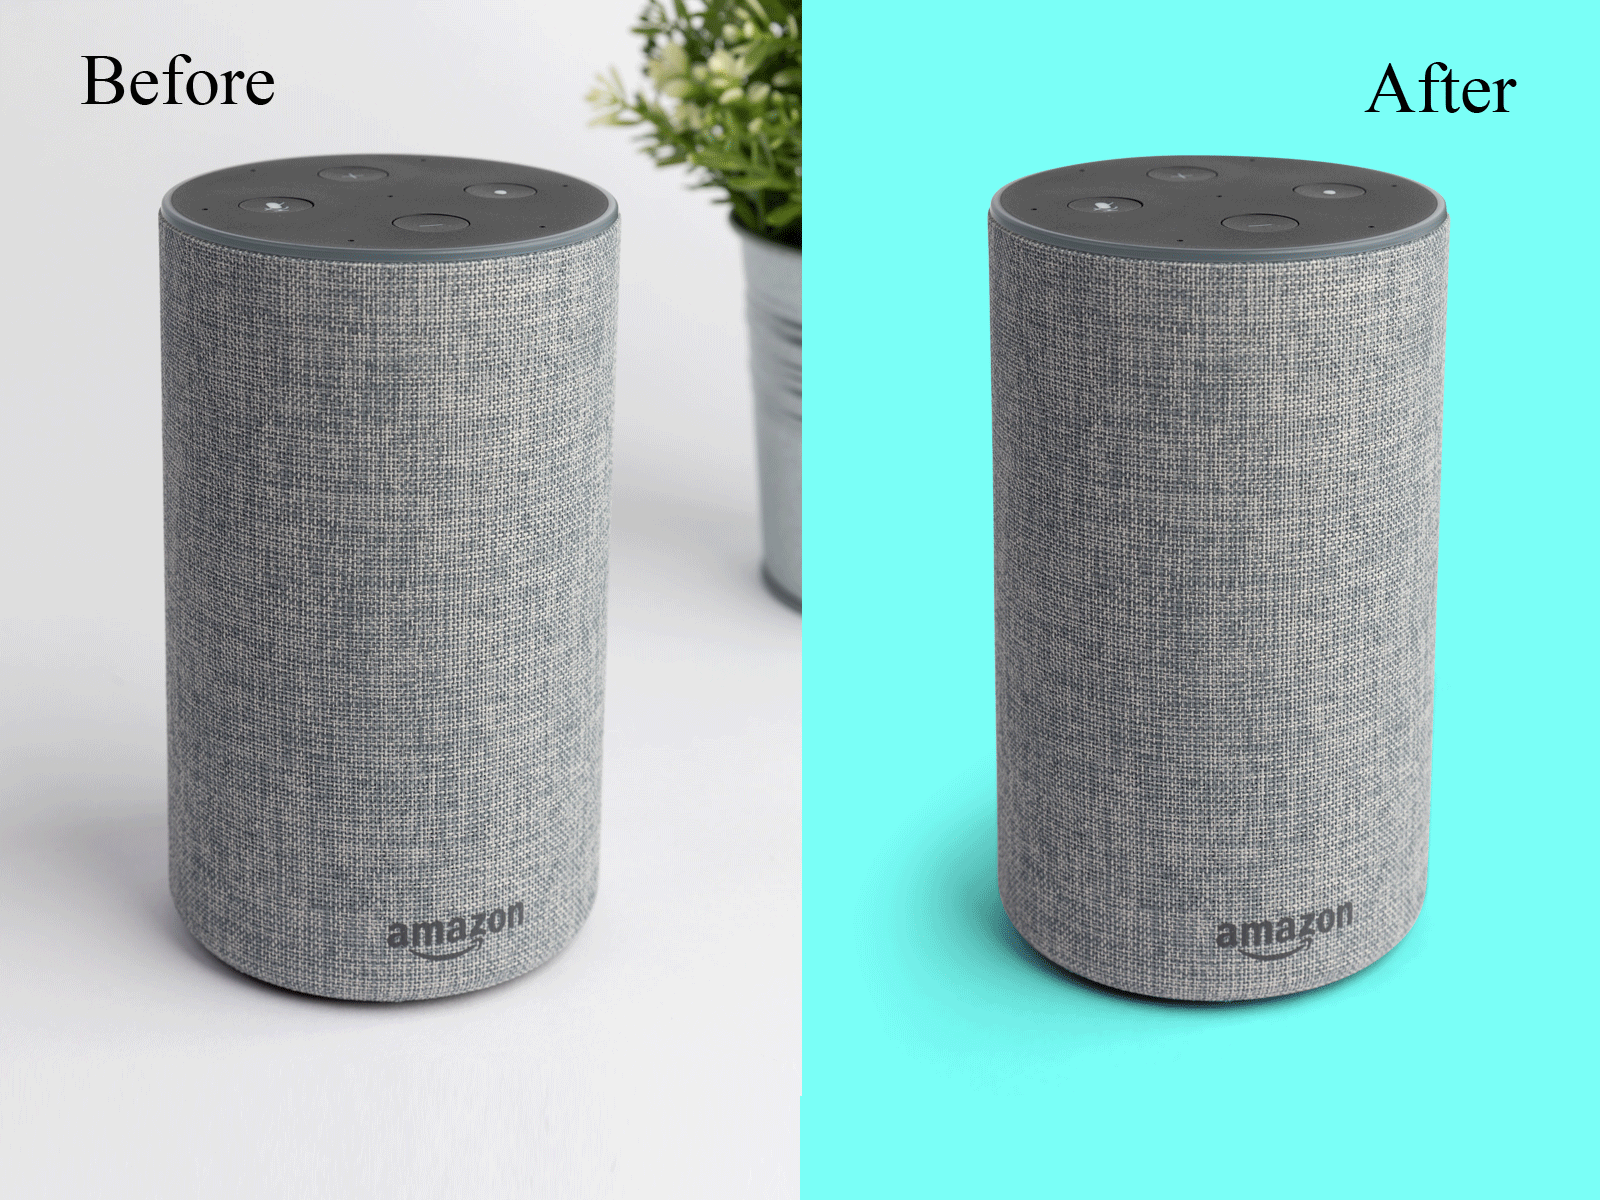 Background remove background background removal background remove clipping mask clipping path service cutout image cutout photoshop remove background from image top graphic designer